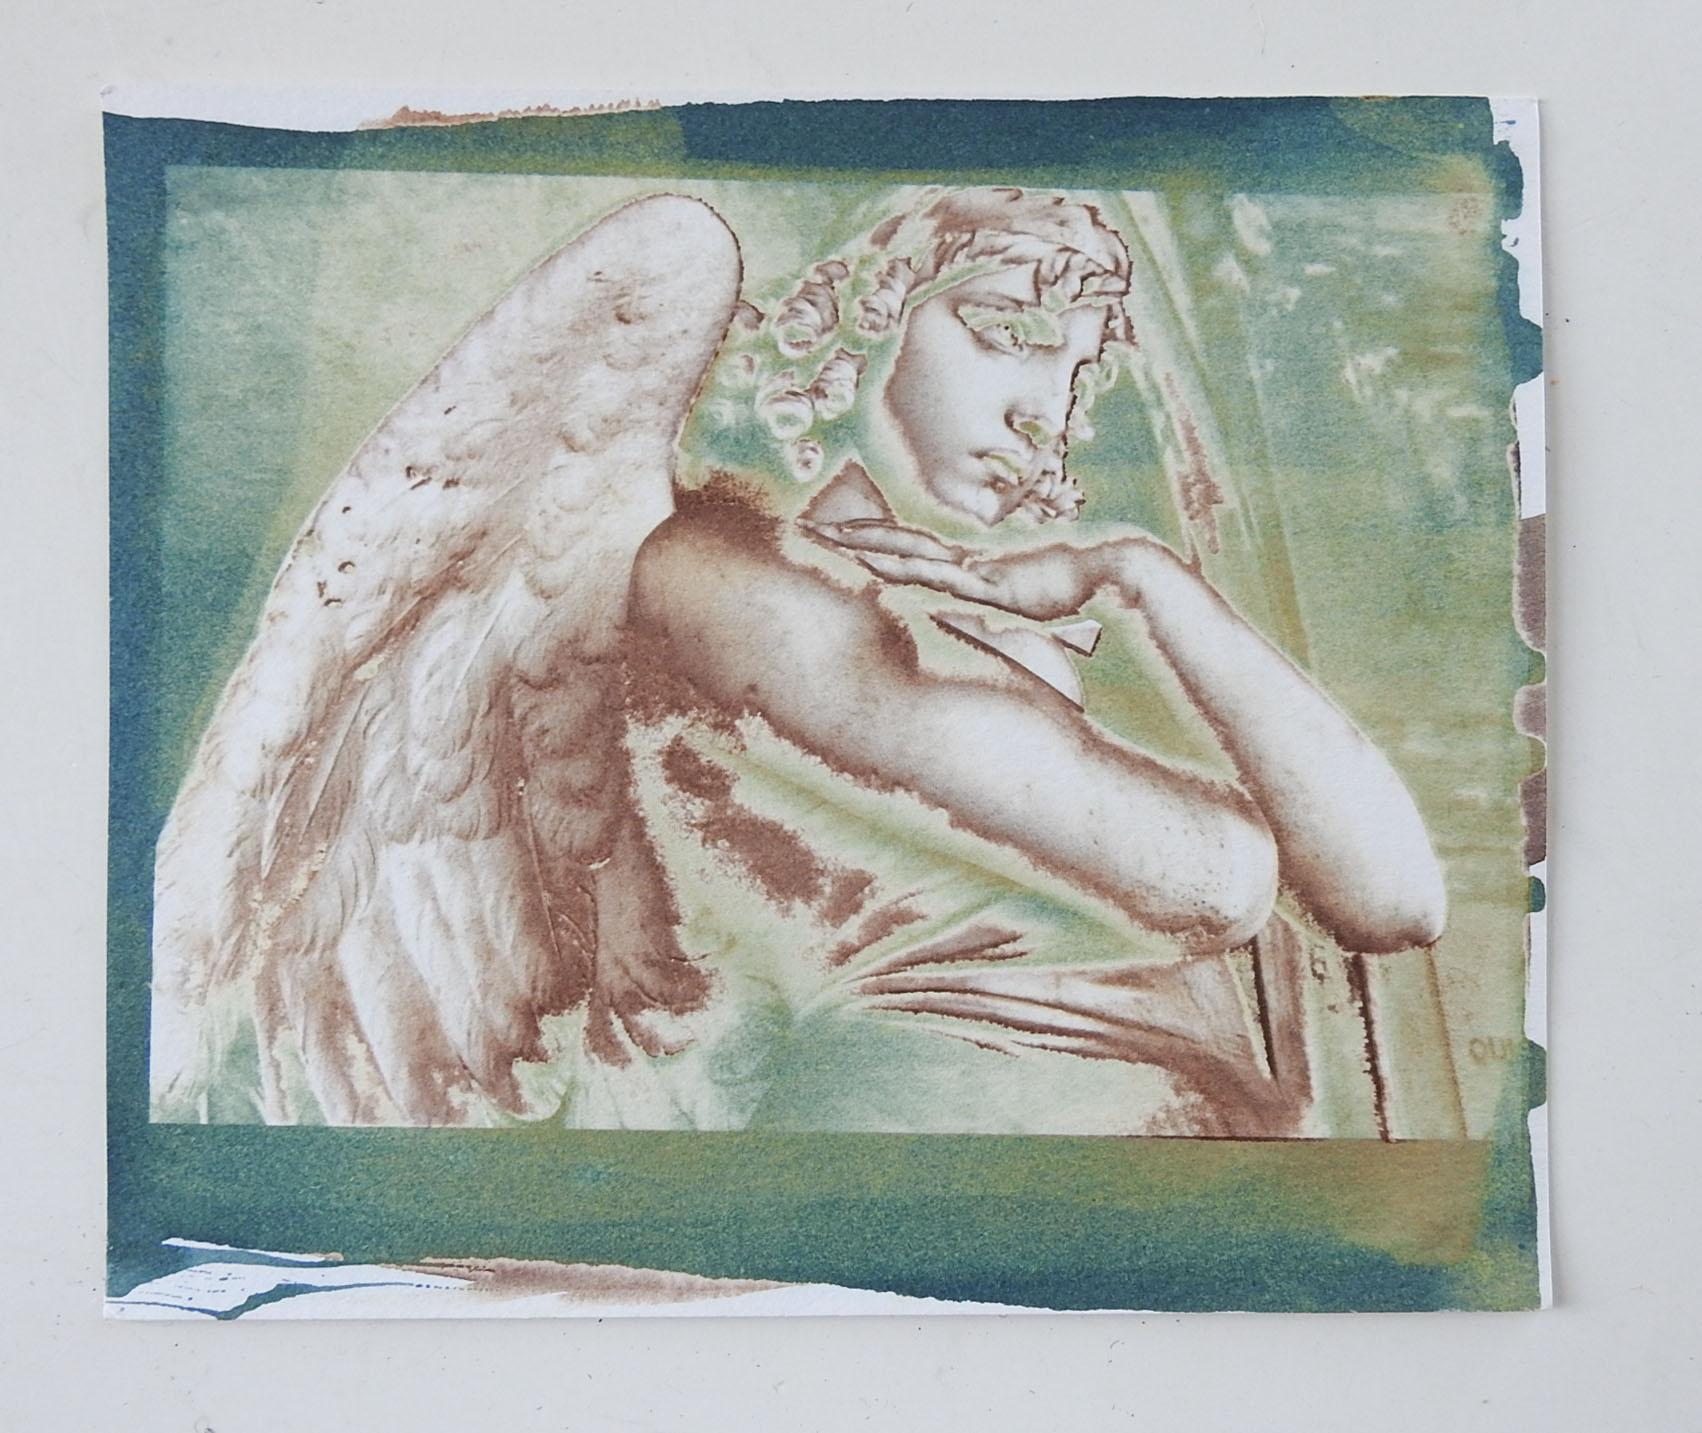 Vintage circa 1990's photograph on heavy paper by Eric C. Weller (20th century) Texas. Monteverde angel sculpture in pale green and sepia tones. Unsigned, Eric Weller was a professor of photography at Texas State University, from the artists estate.